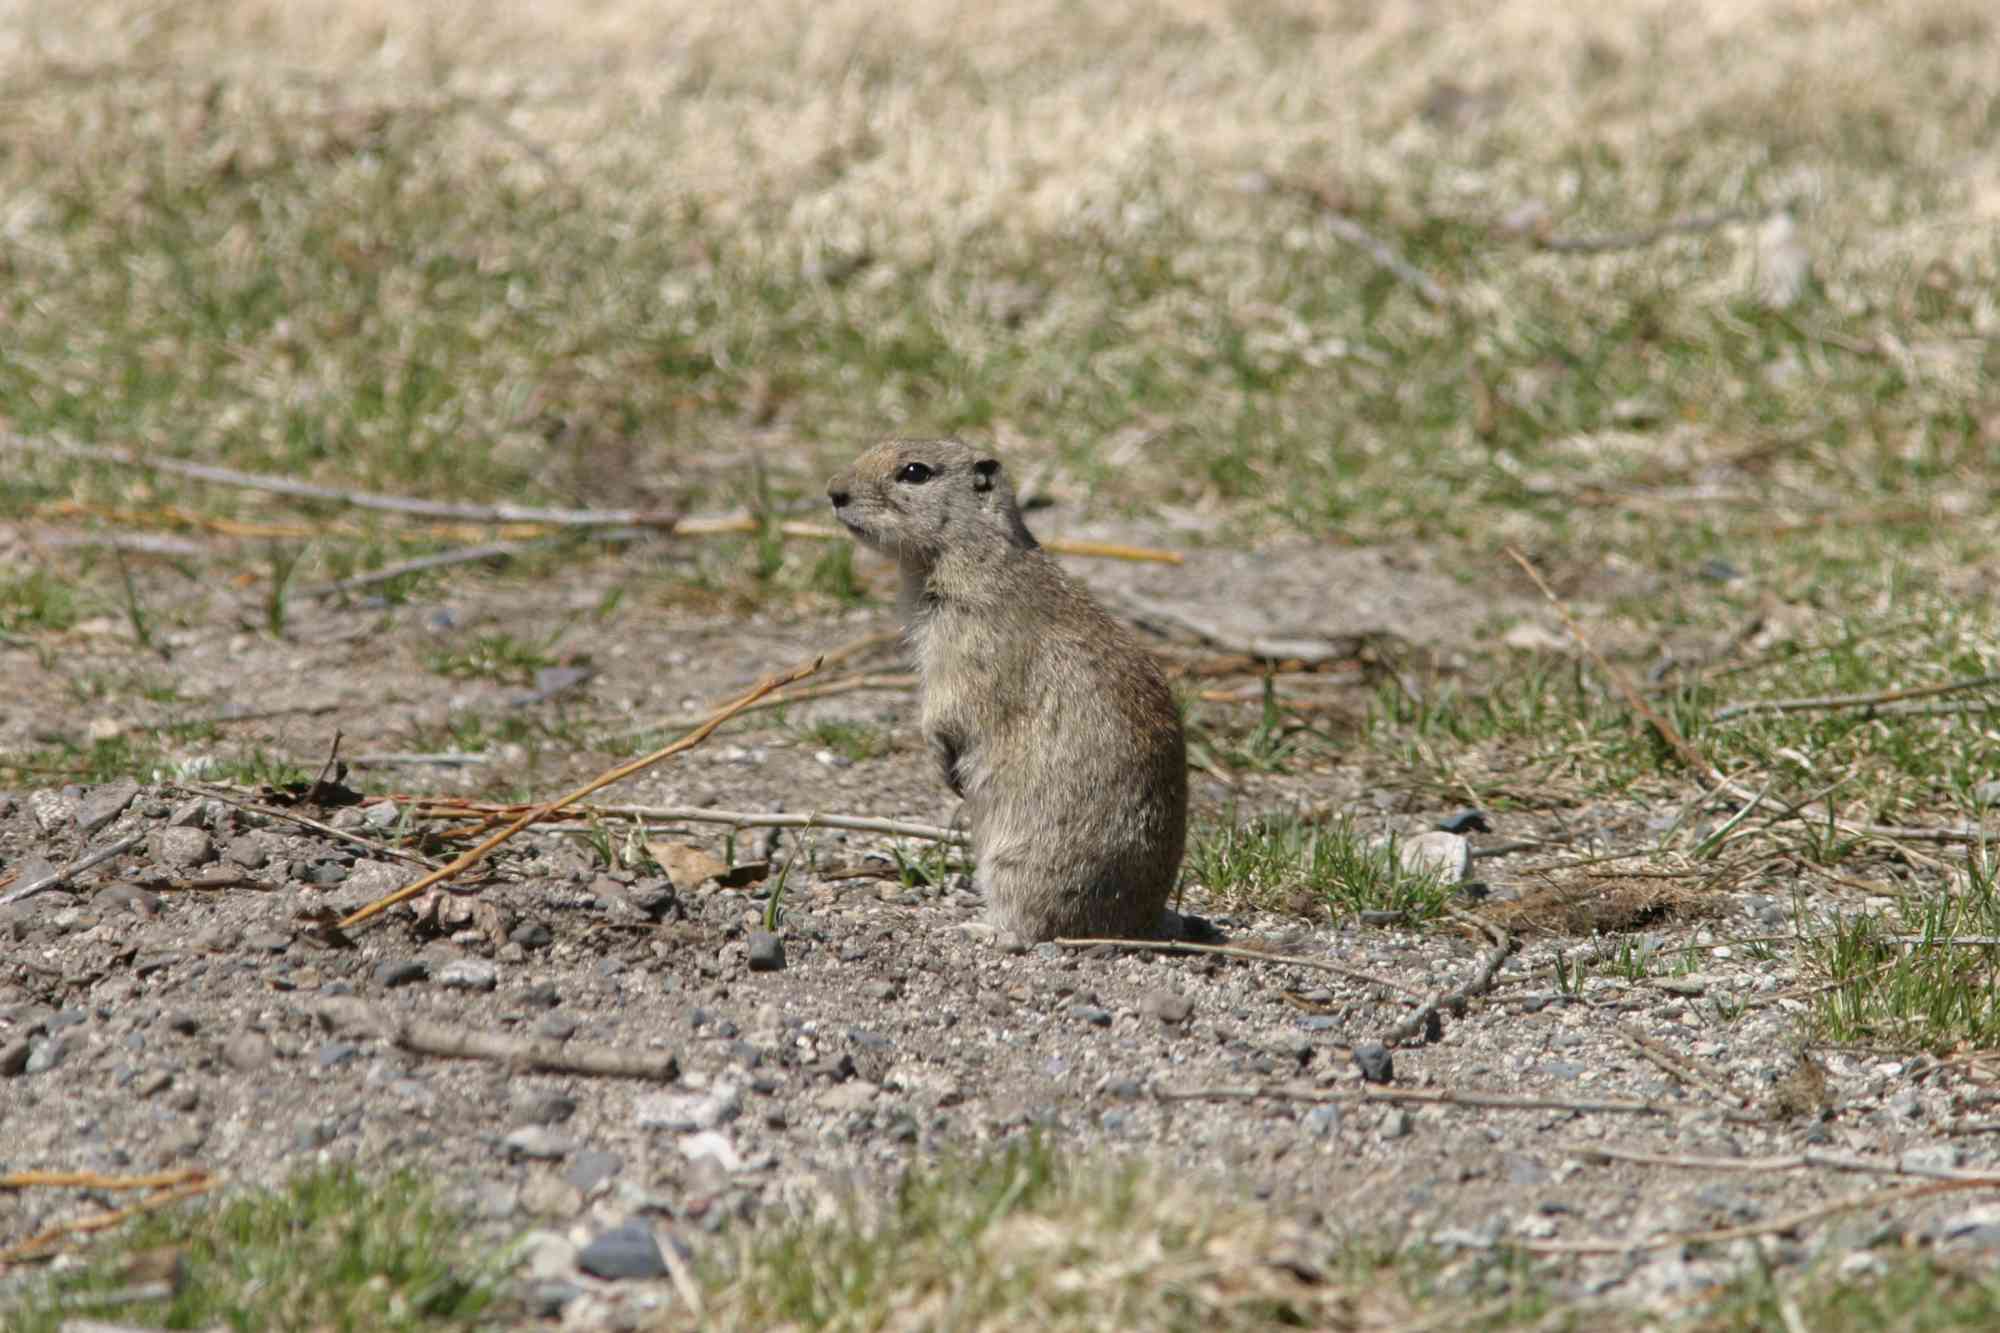 2005.04.14 - Mohave Ground Squirrel - Death Valley, California - Marcel Holyoak (CC BY-NC-ND 2.0 DEED)